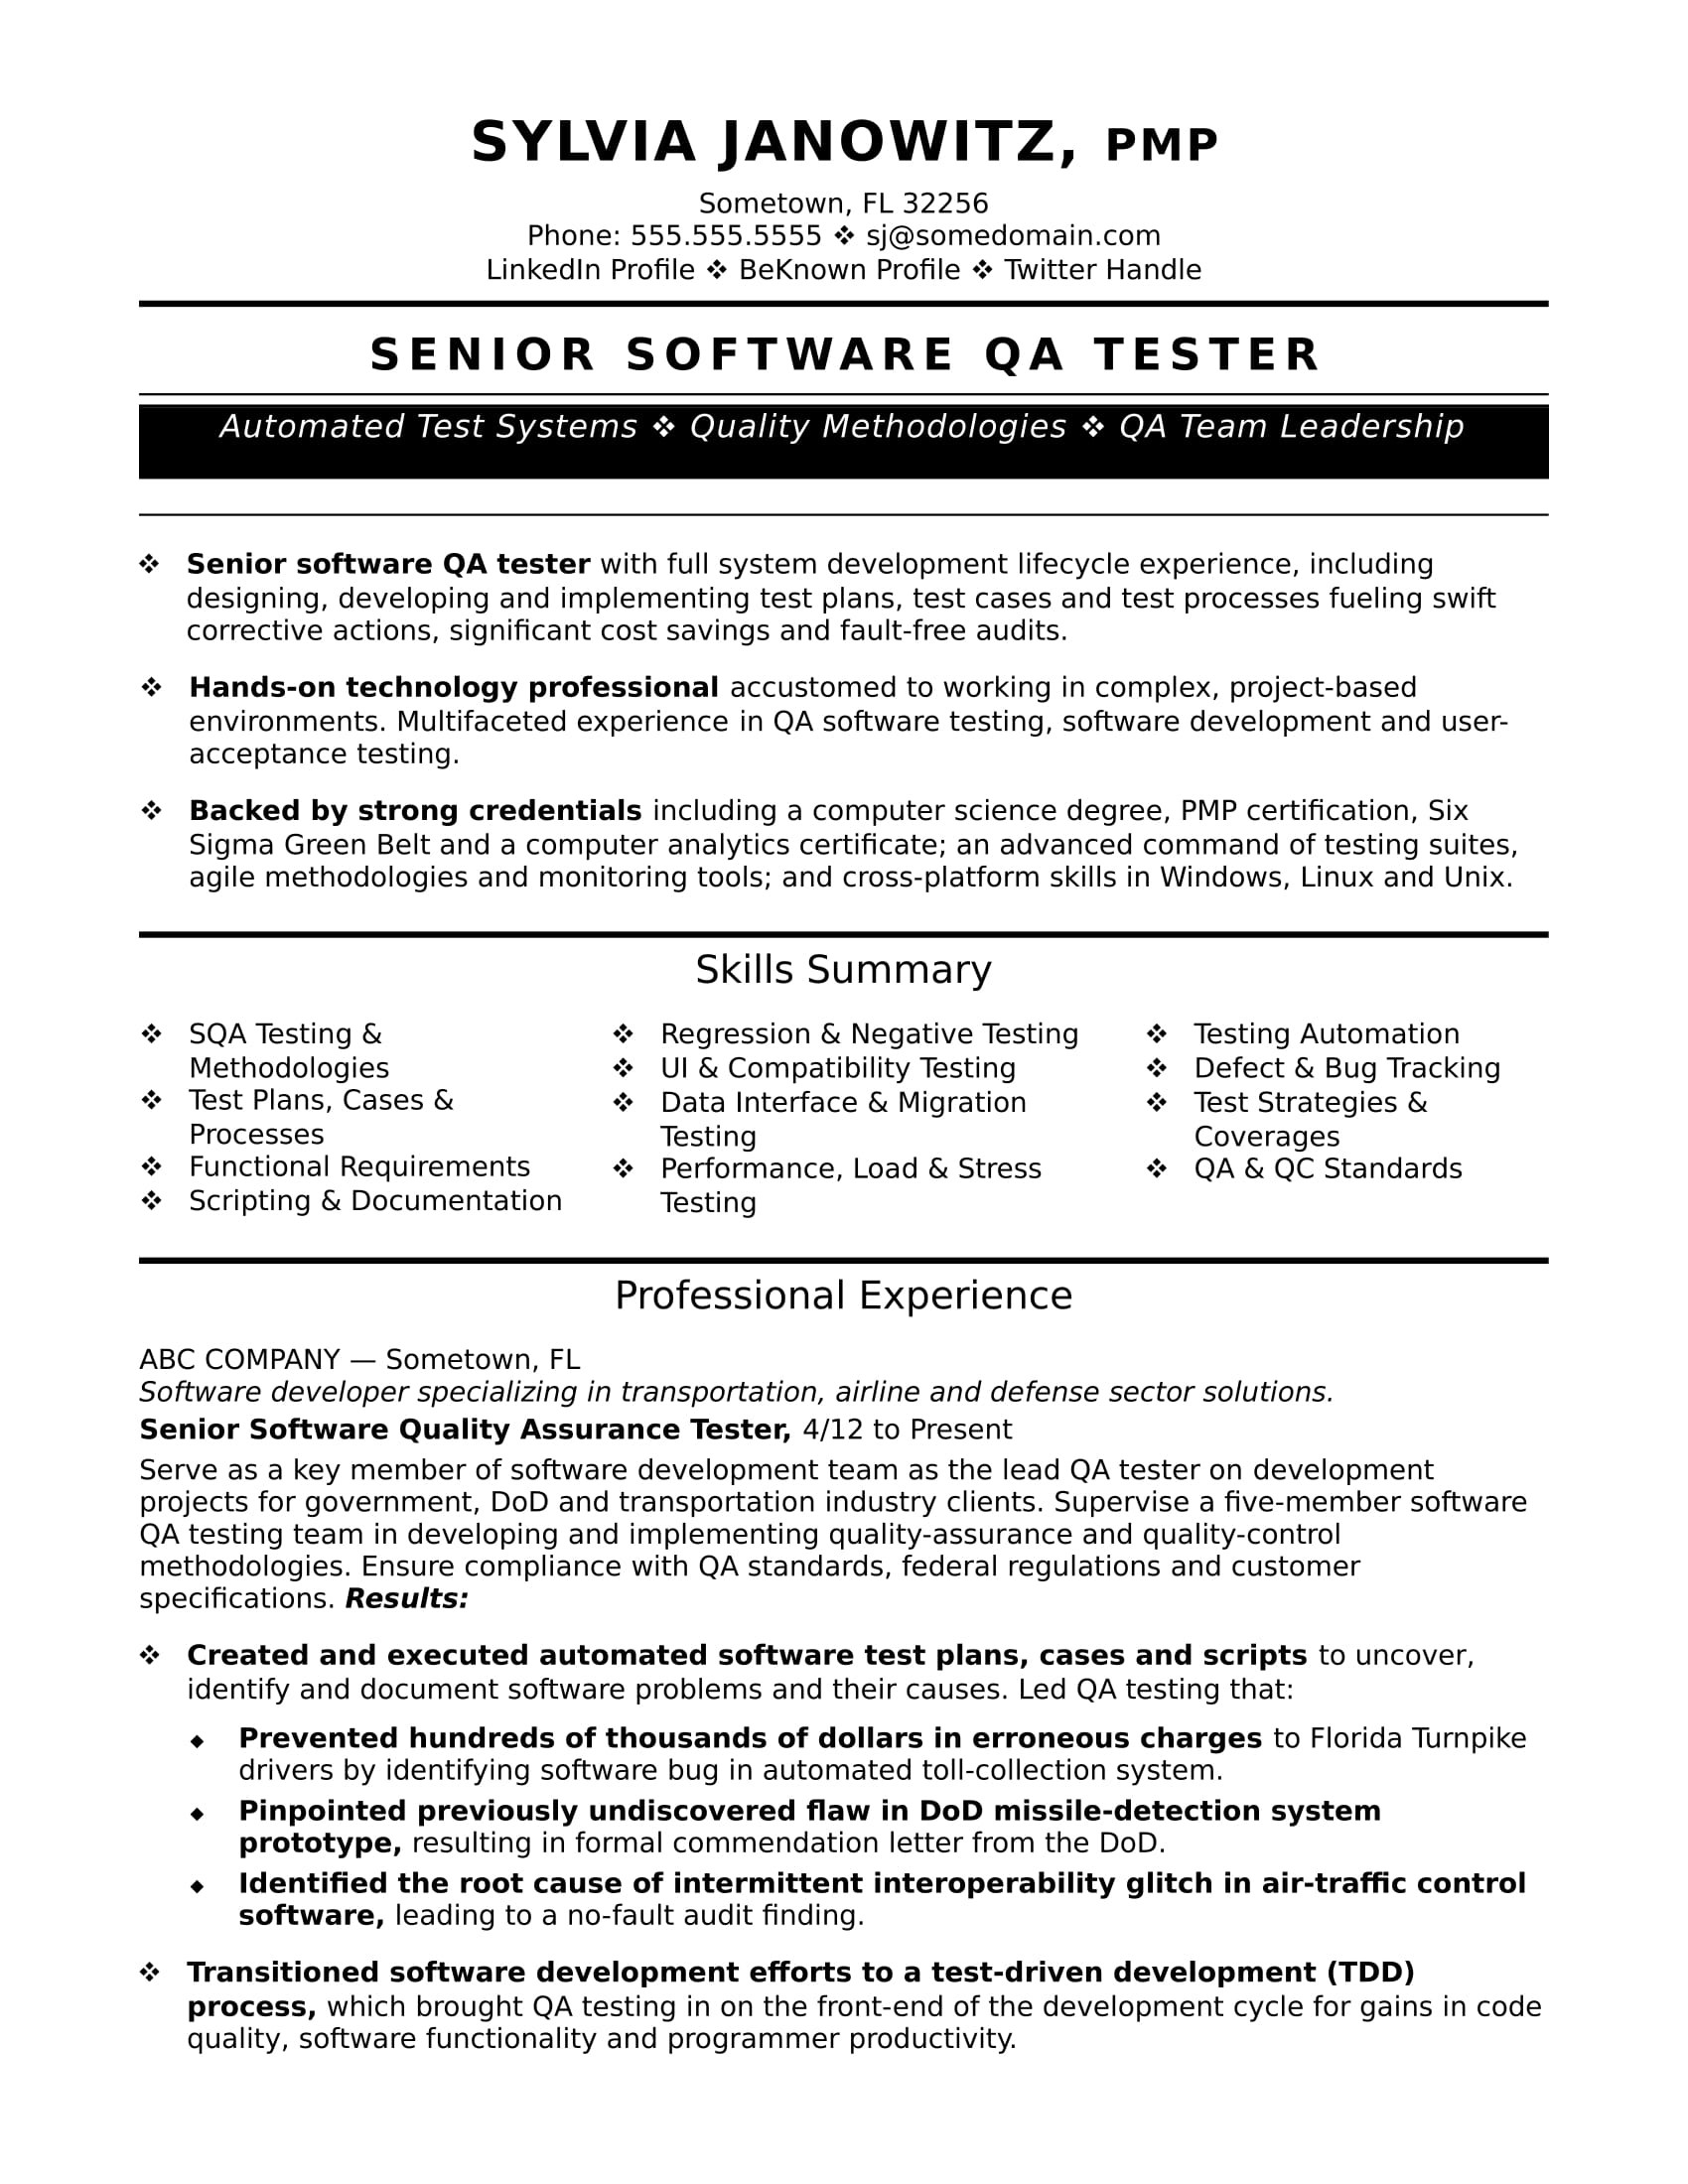 Latest Resume Samples for Experienced Candidates Experienced Qa software Tester Resume Sample Monster.com